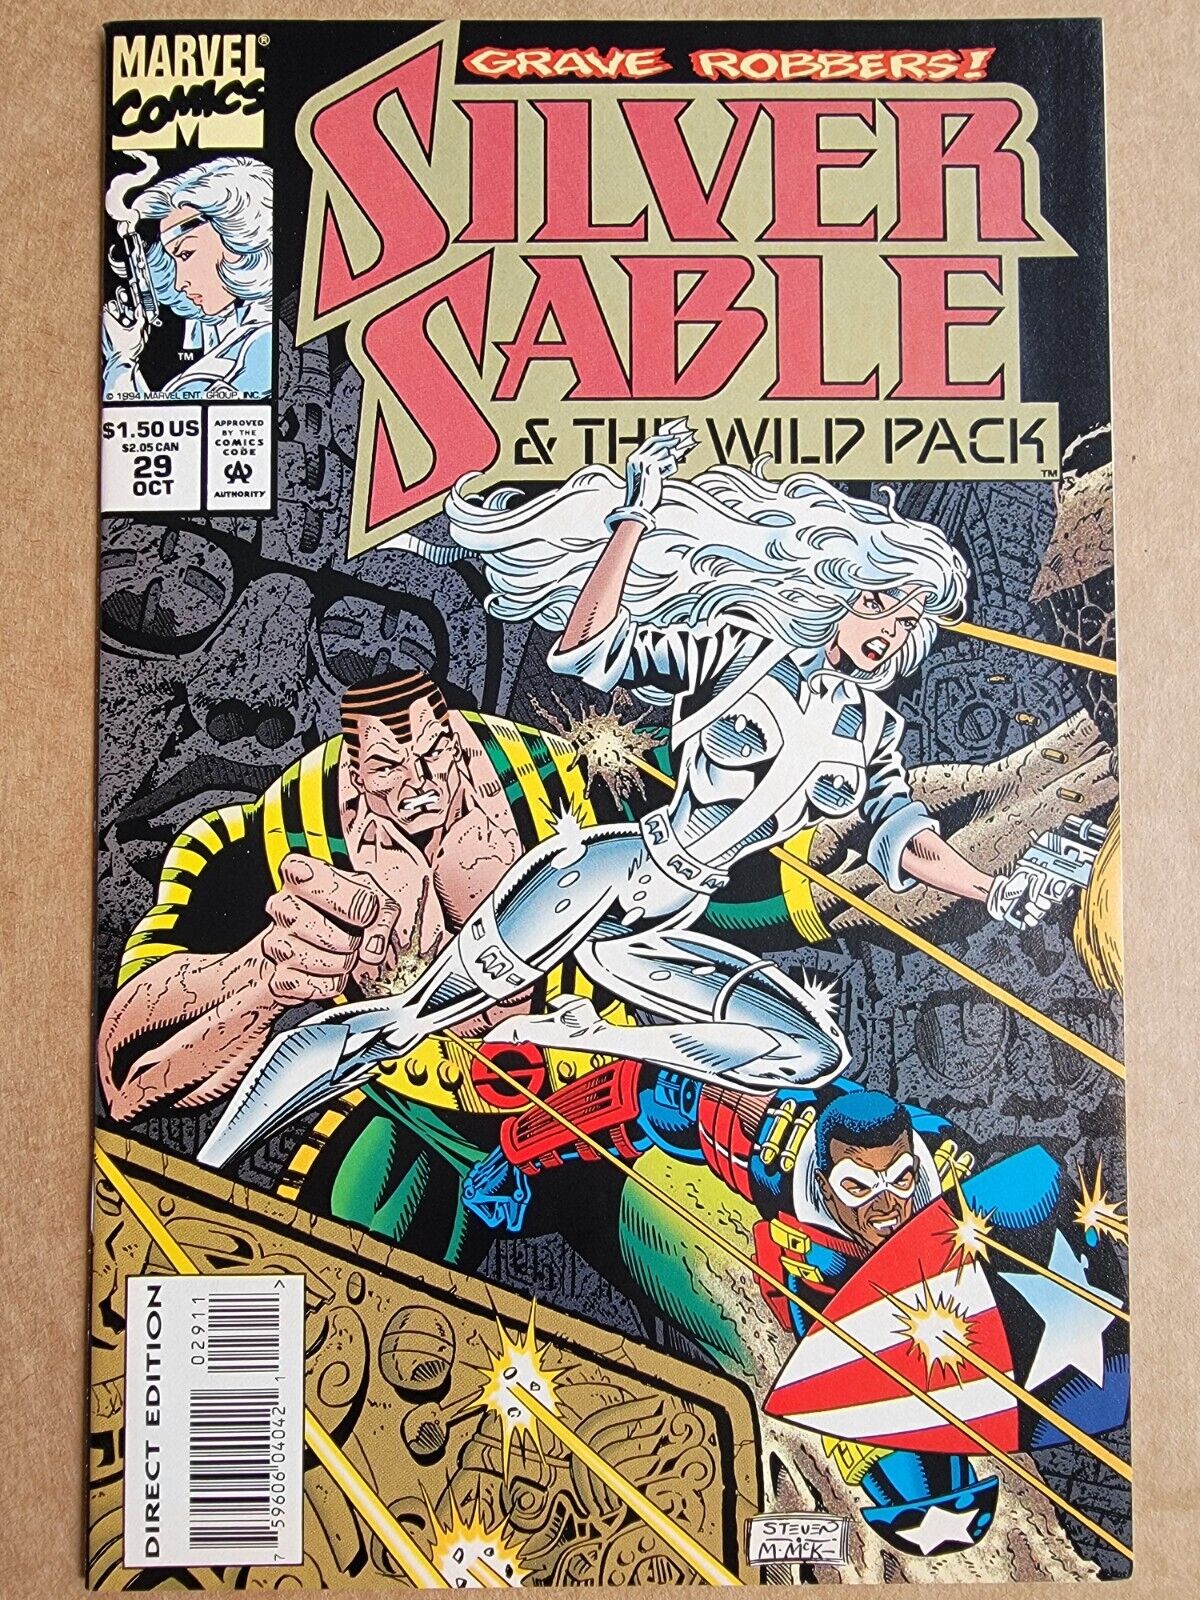 Silver Sable and the Wild Pack #29 (Marvel Comics 1994)